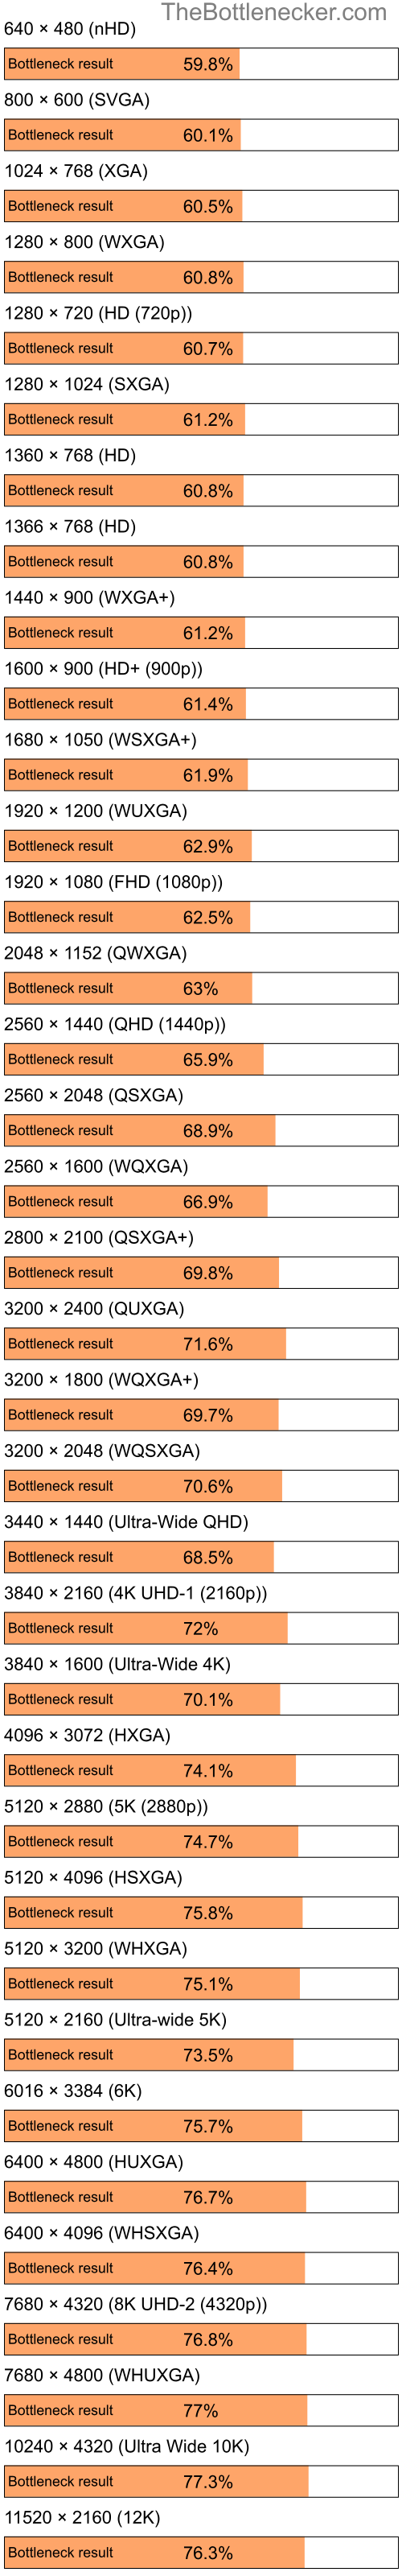 Bottleneck results by resolution for Intel Pentium 4 and AMD Radeon HD 6290 in General Tasks